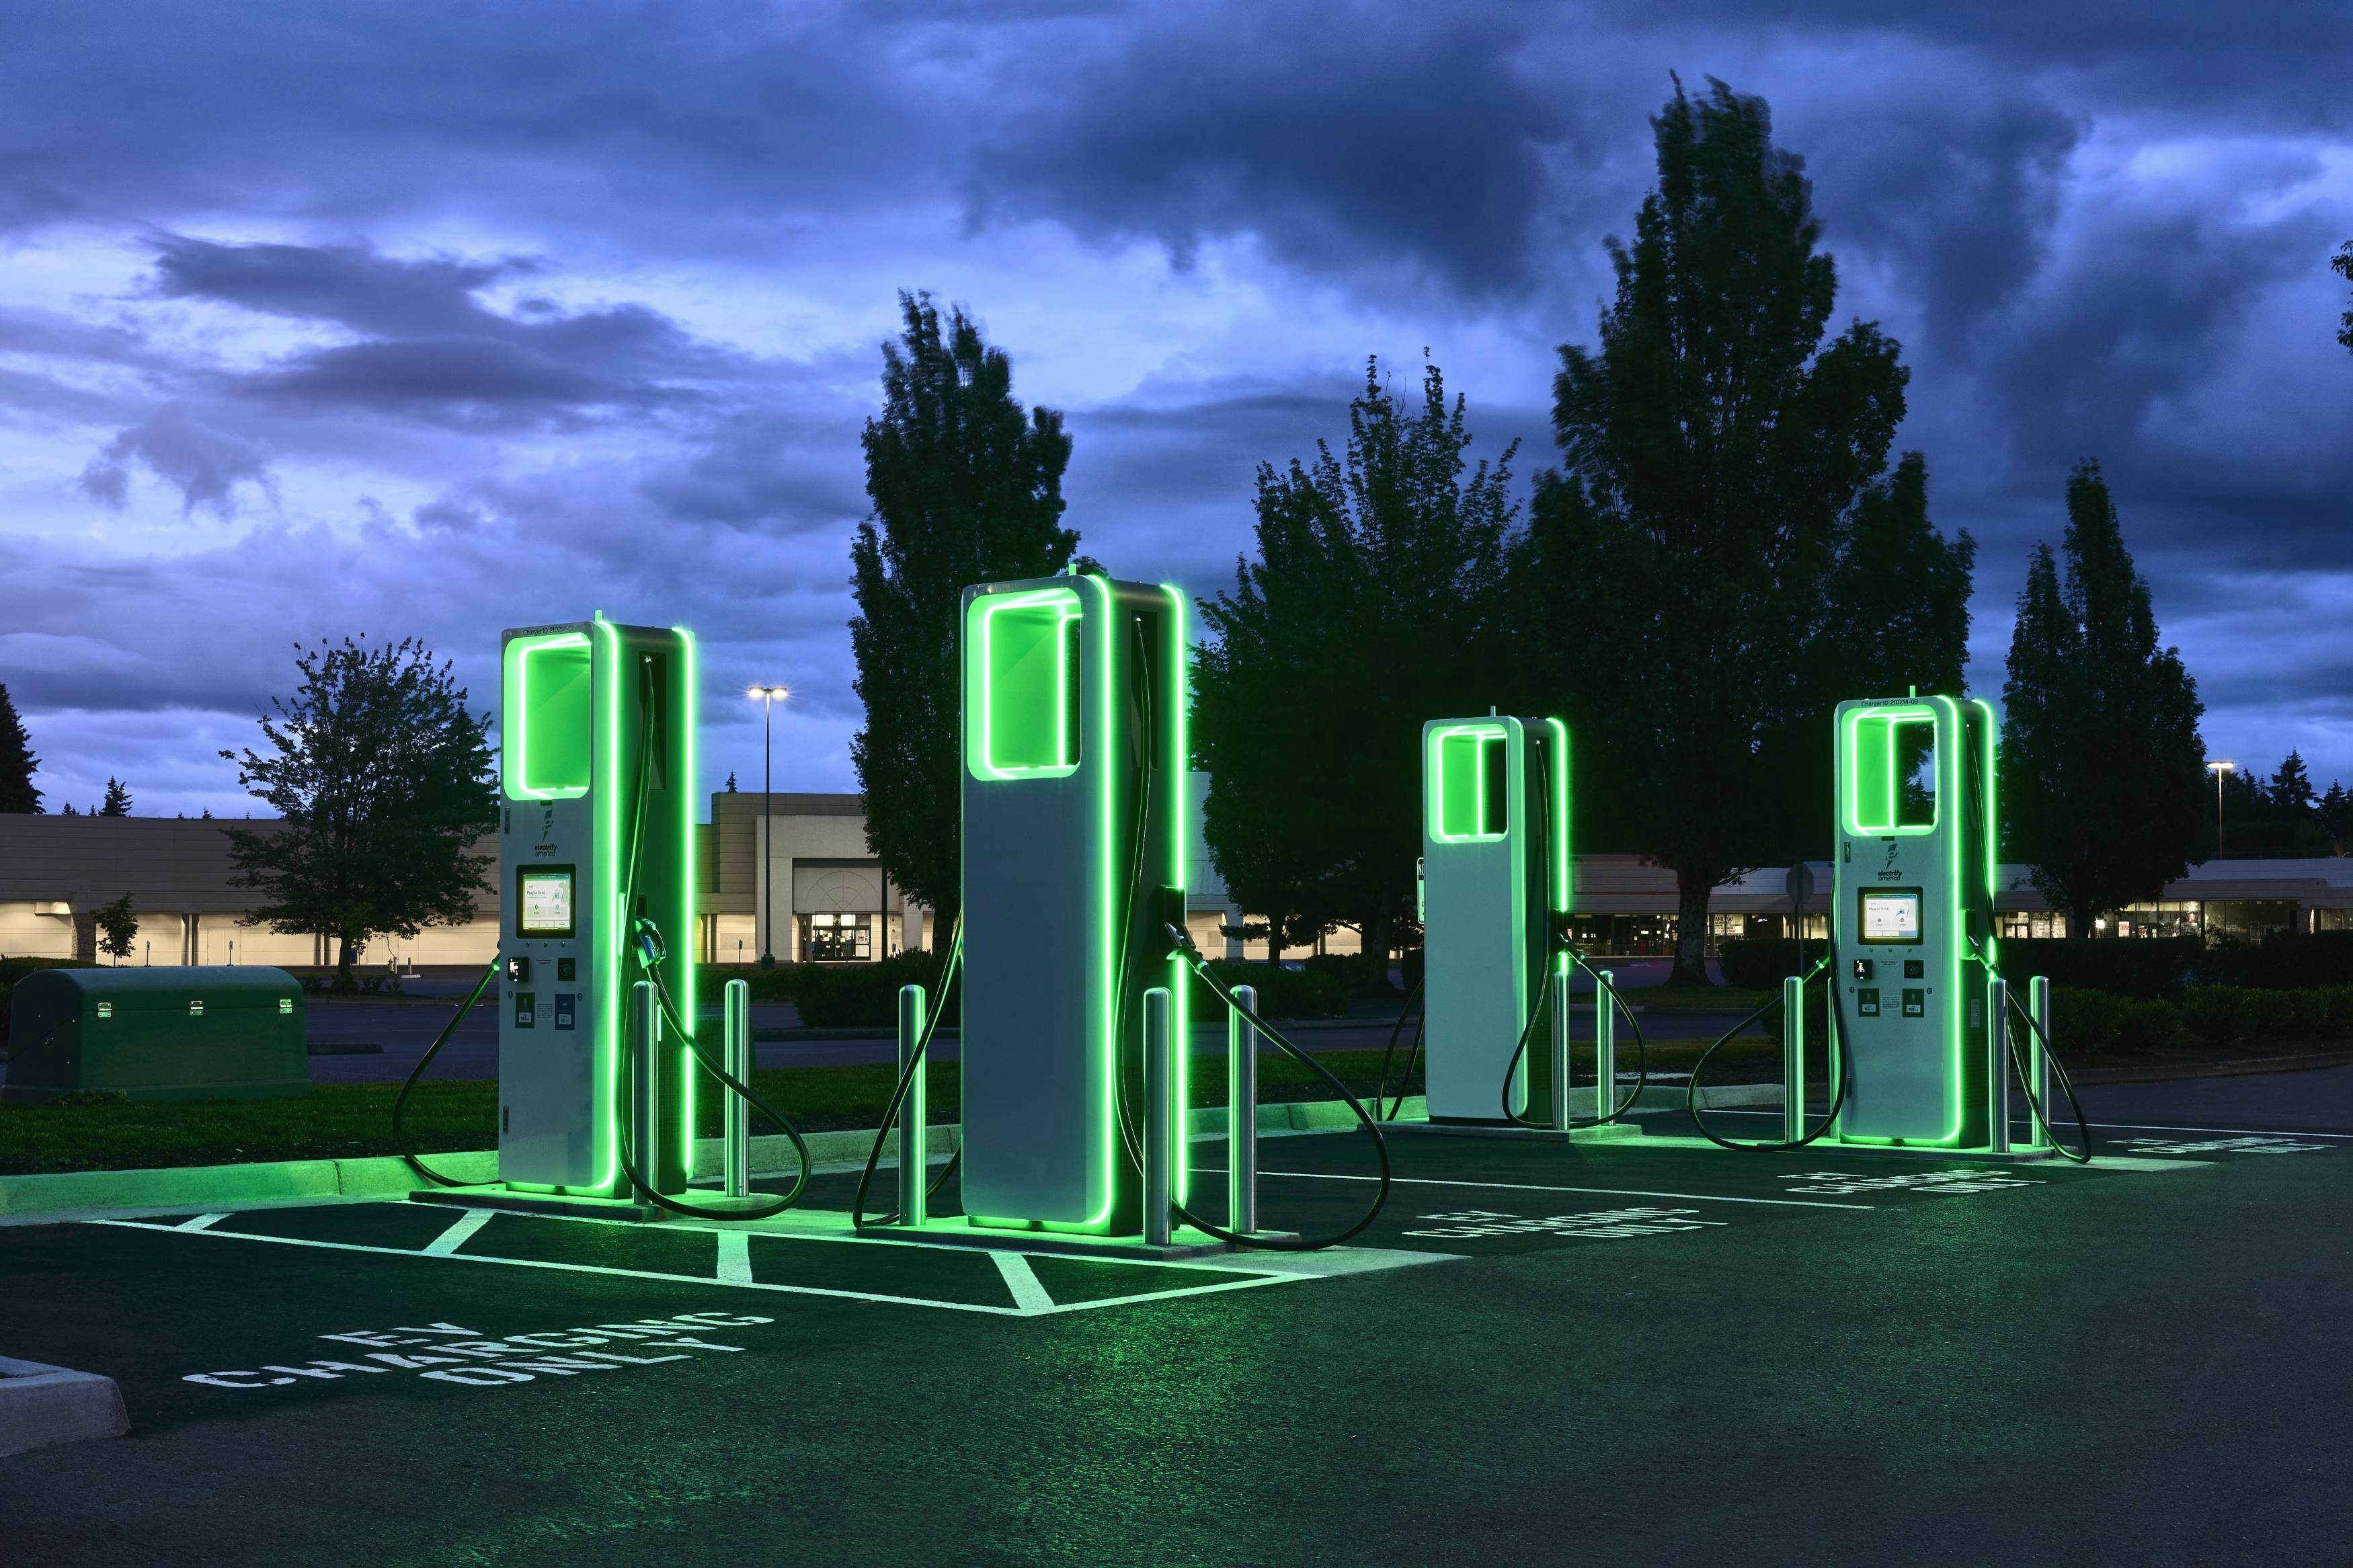 electrify america chargers glowing green at night